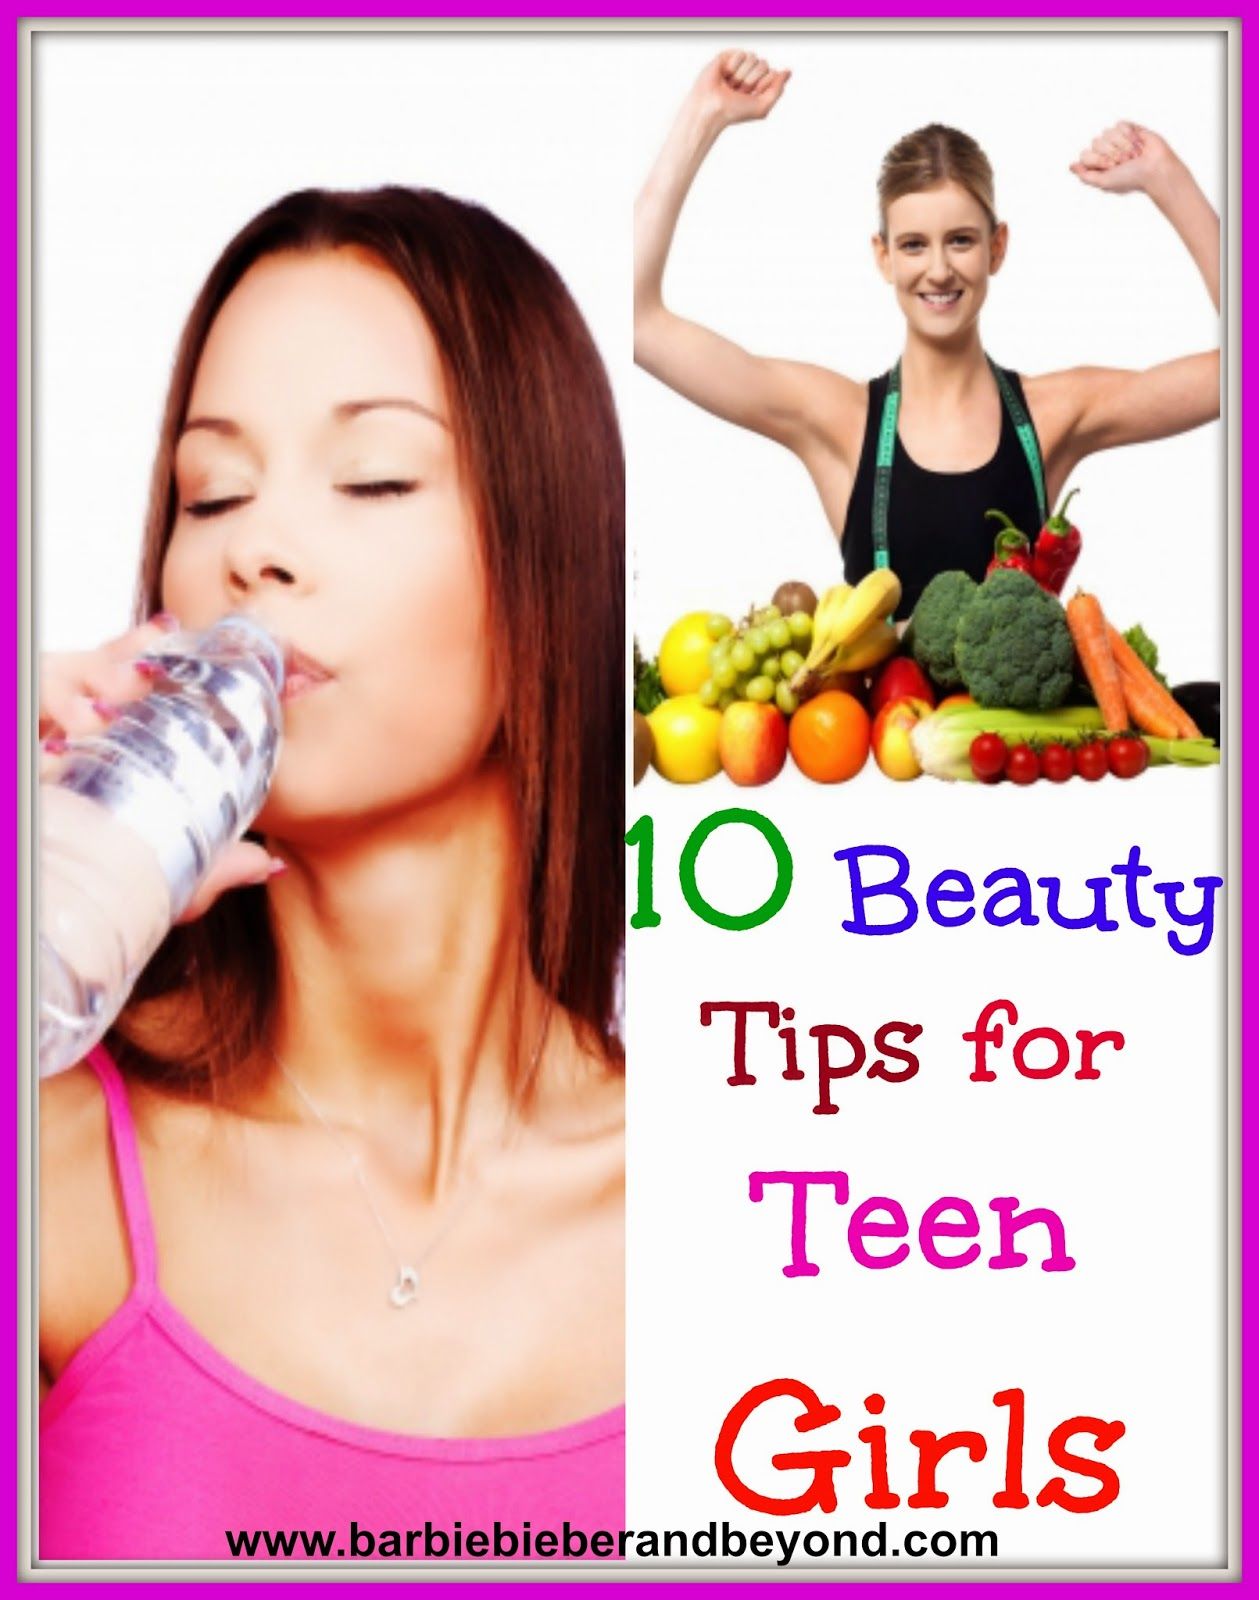 And tips for teen girl